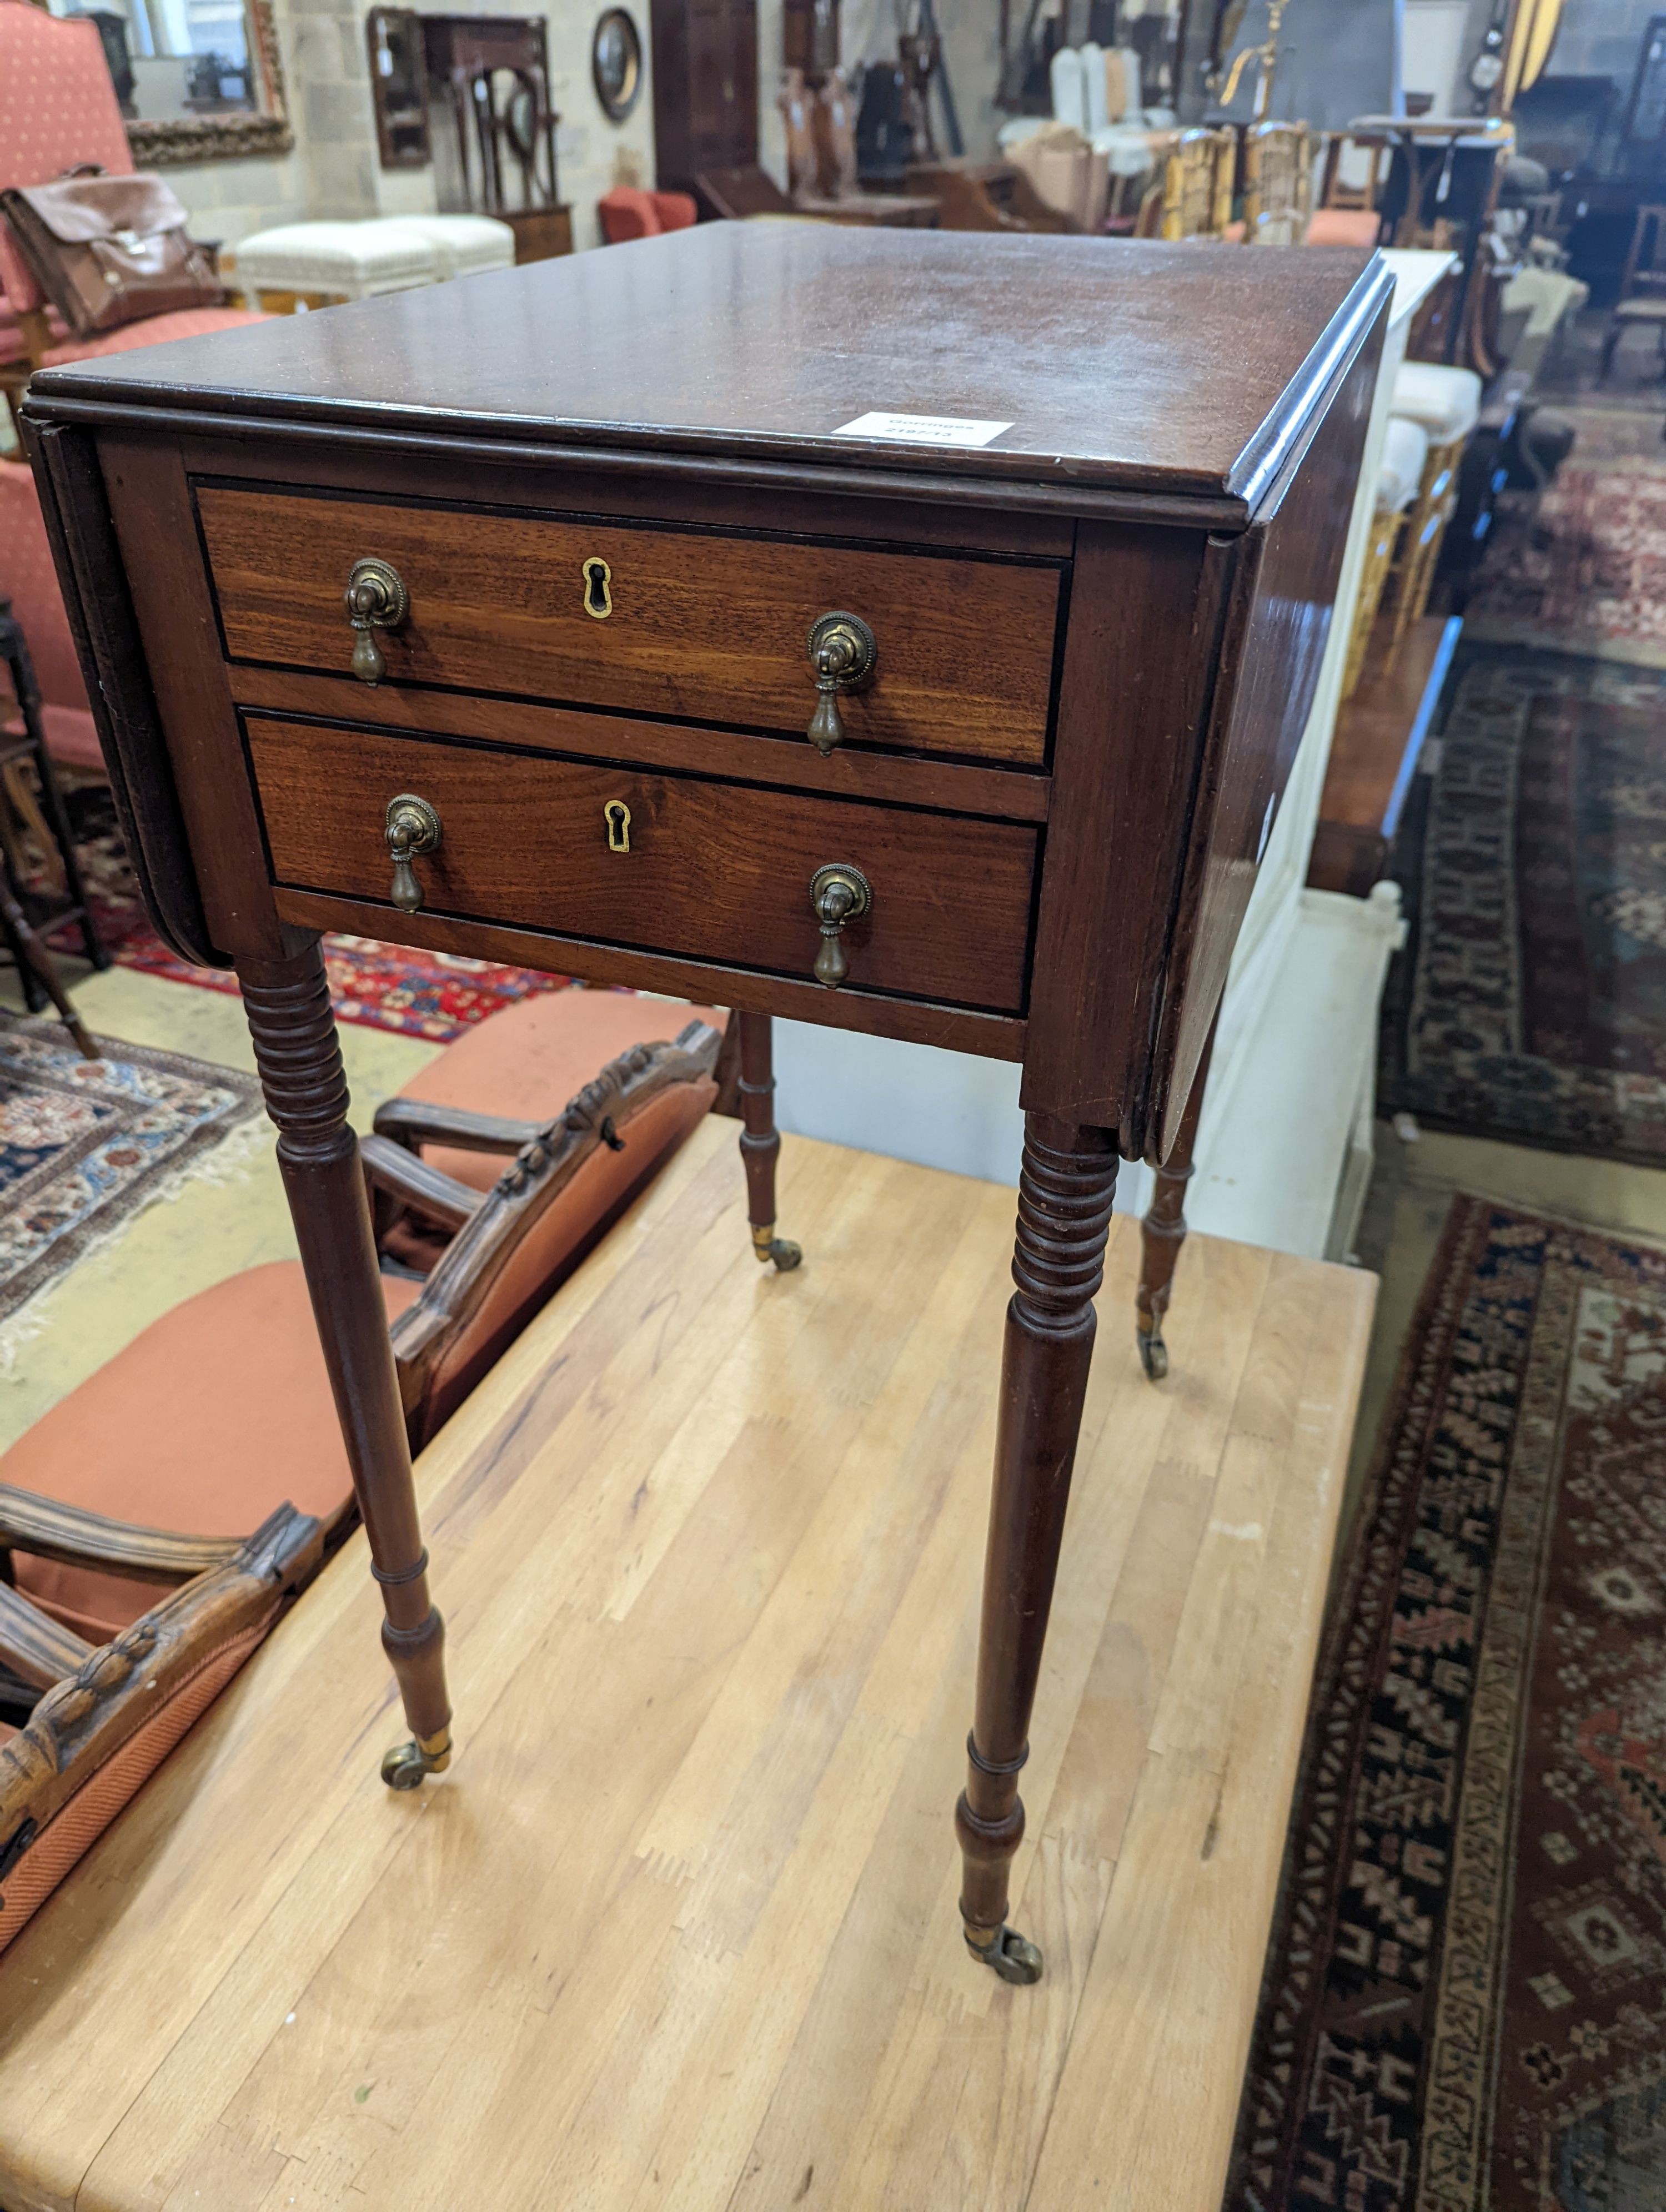 A Regency mahogany drop flap work table, the drawers with brass pear drop handles, width 37cm, depth 53cm, height 73cm